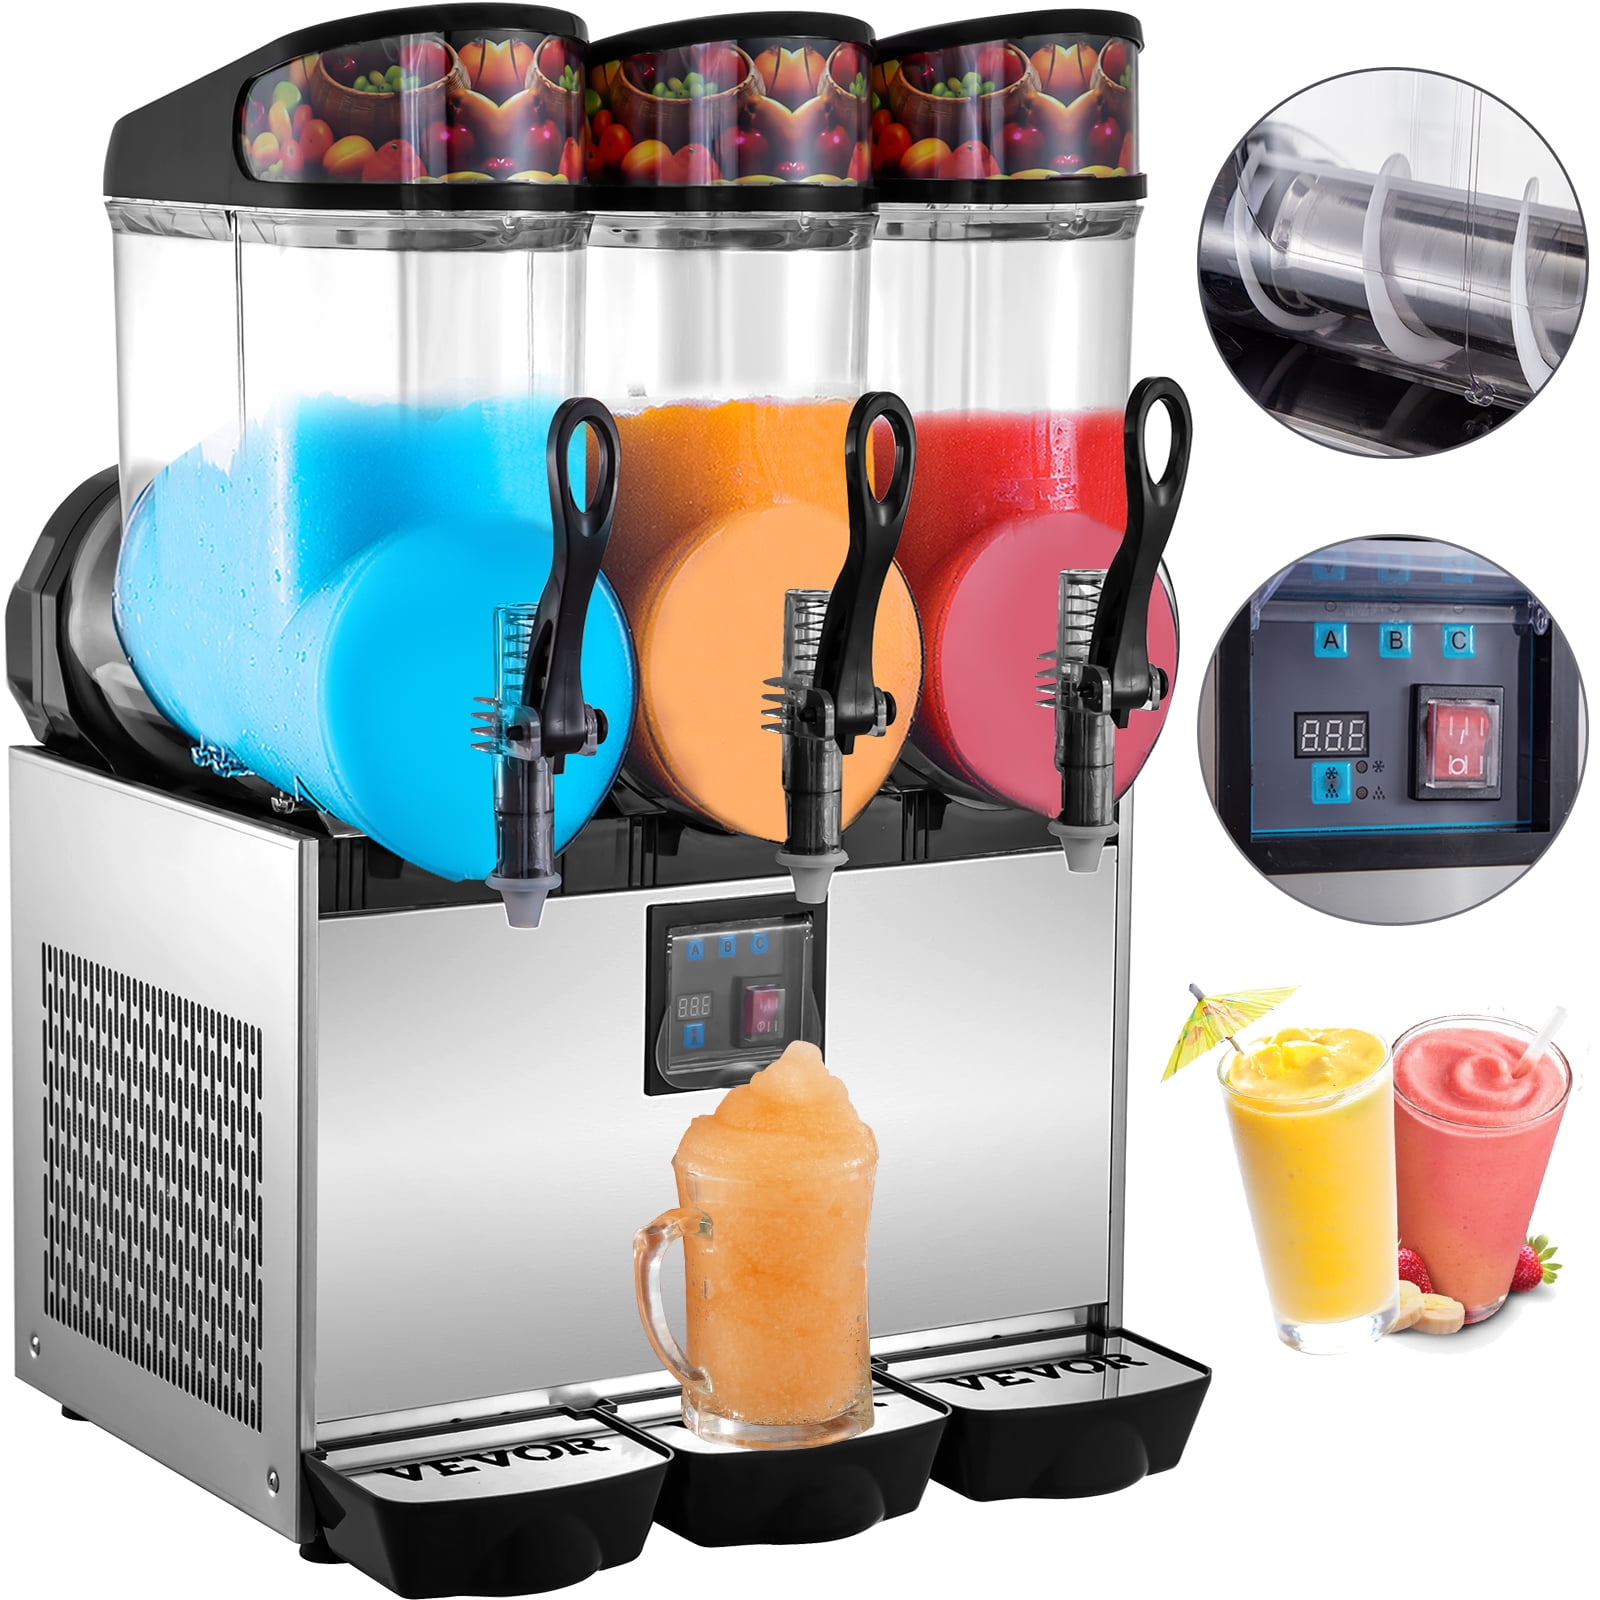 24L Sliver Happybuy 110V Commercial Slushy Machine 1600W 12L x 2 Tank Stainless Steel Margarita Smoothie Frozen Drink Maker Perfect for Ice Juice Tea Coffee Making 